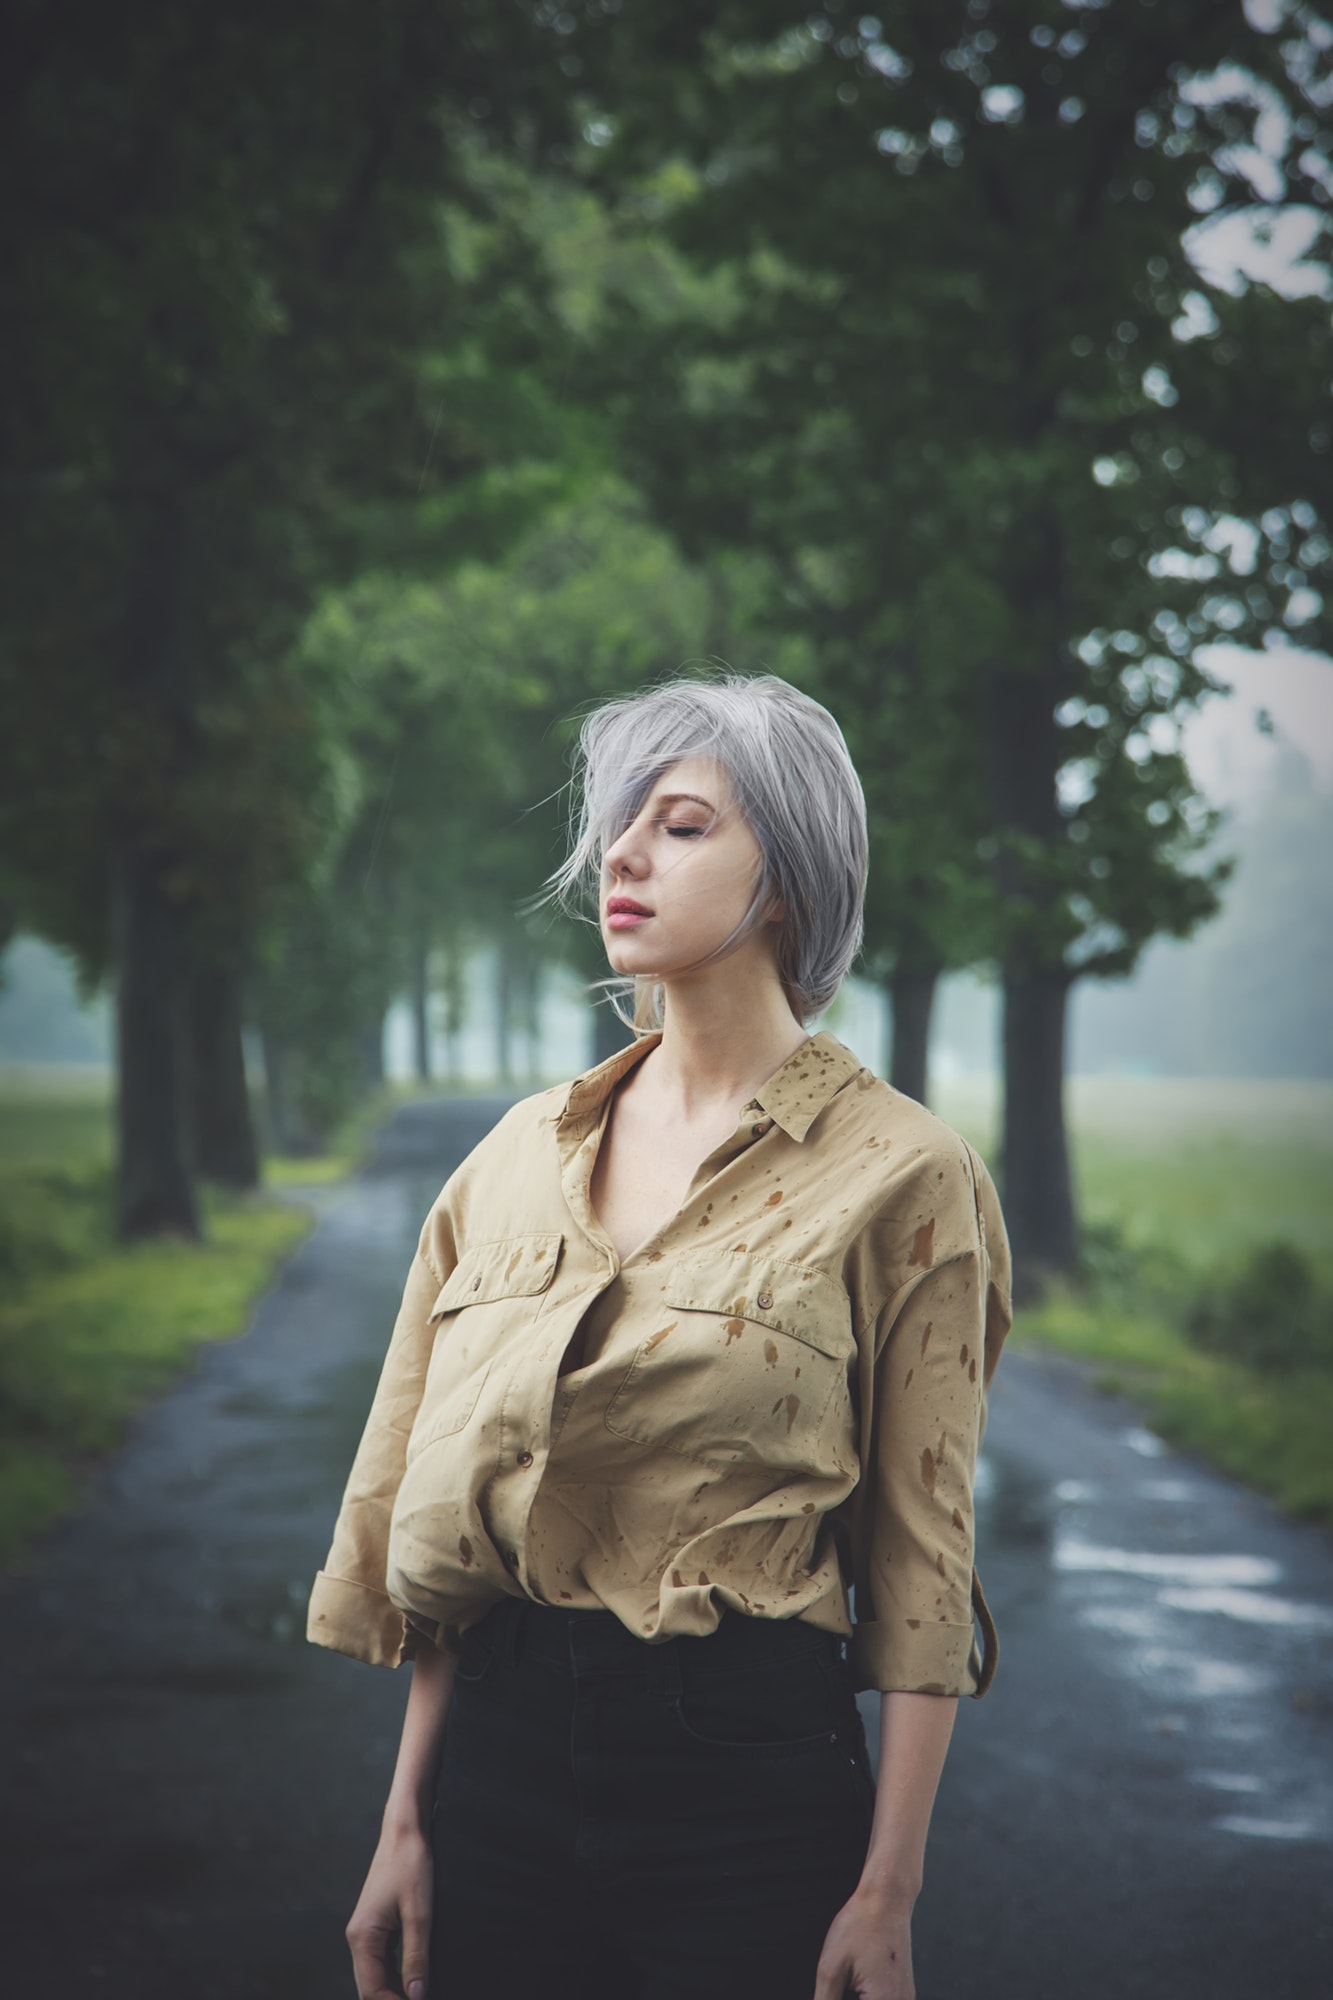 Blonde girl in depression at countryside road in rainy day